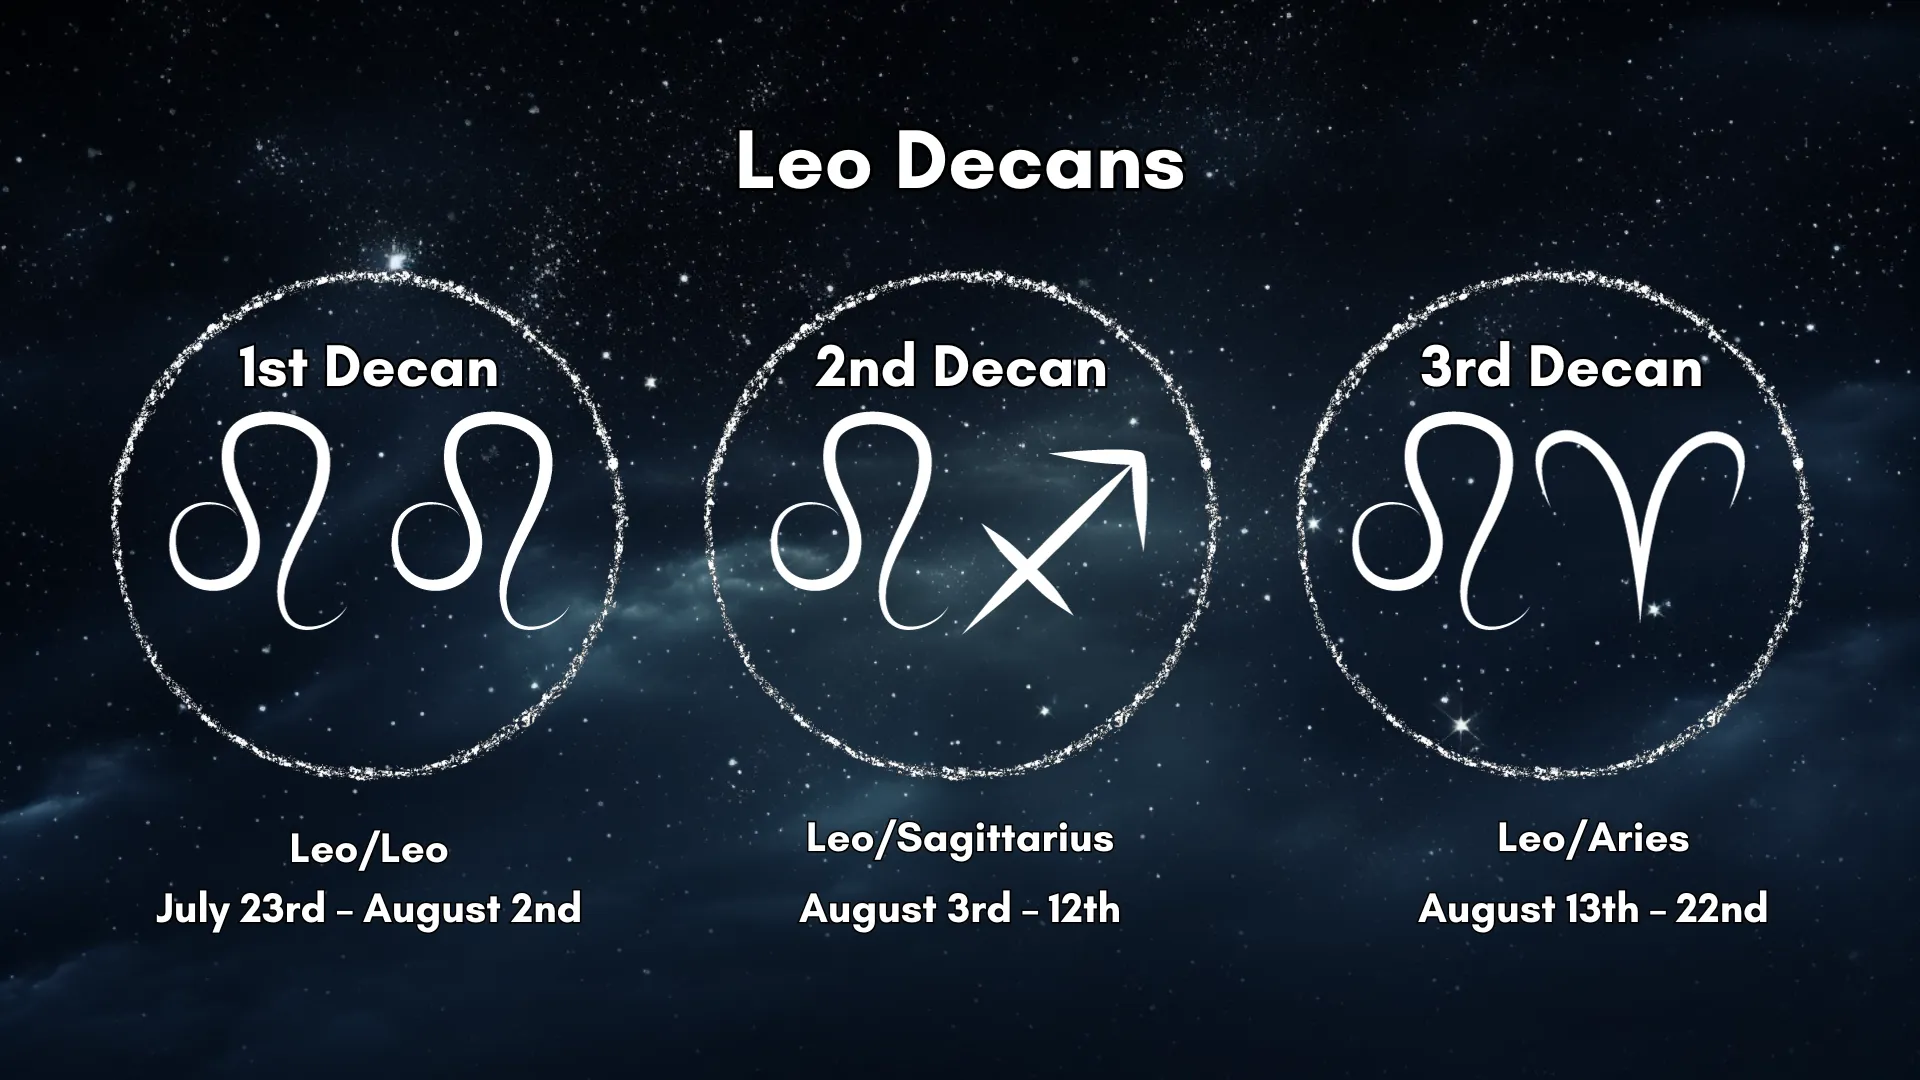 The Leo Decans are laid out in a chart that is easy to understand.